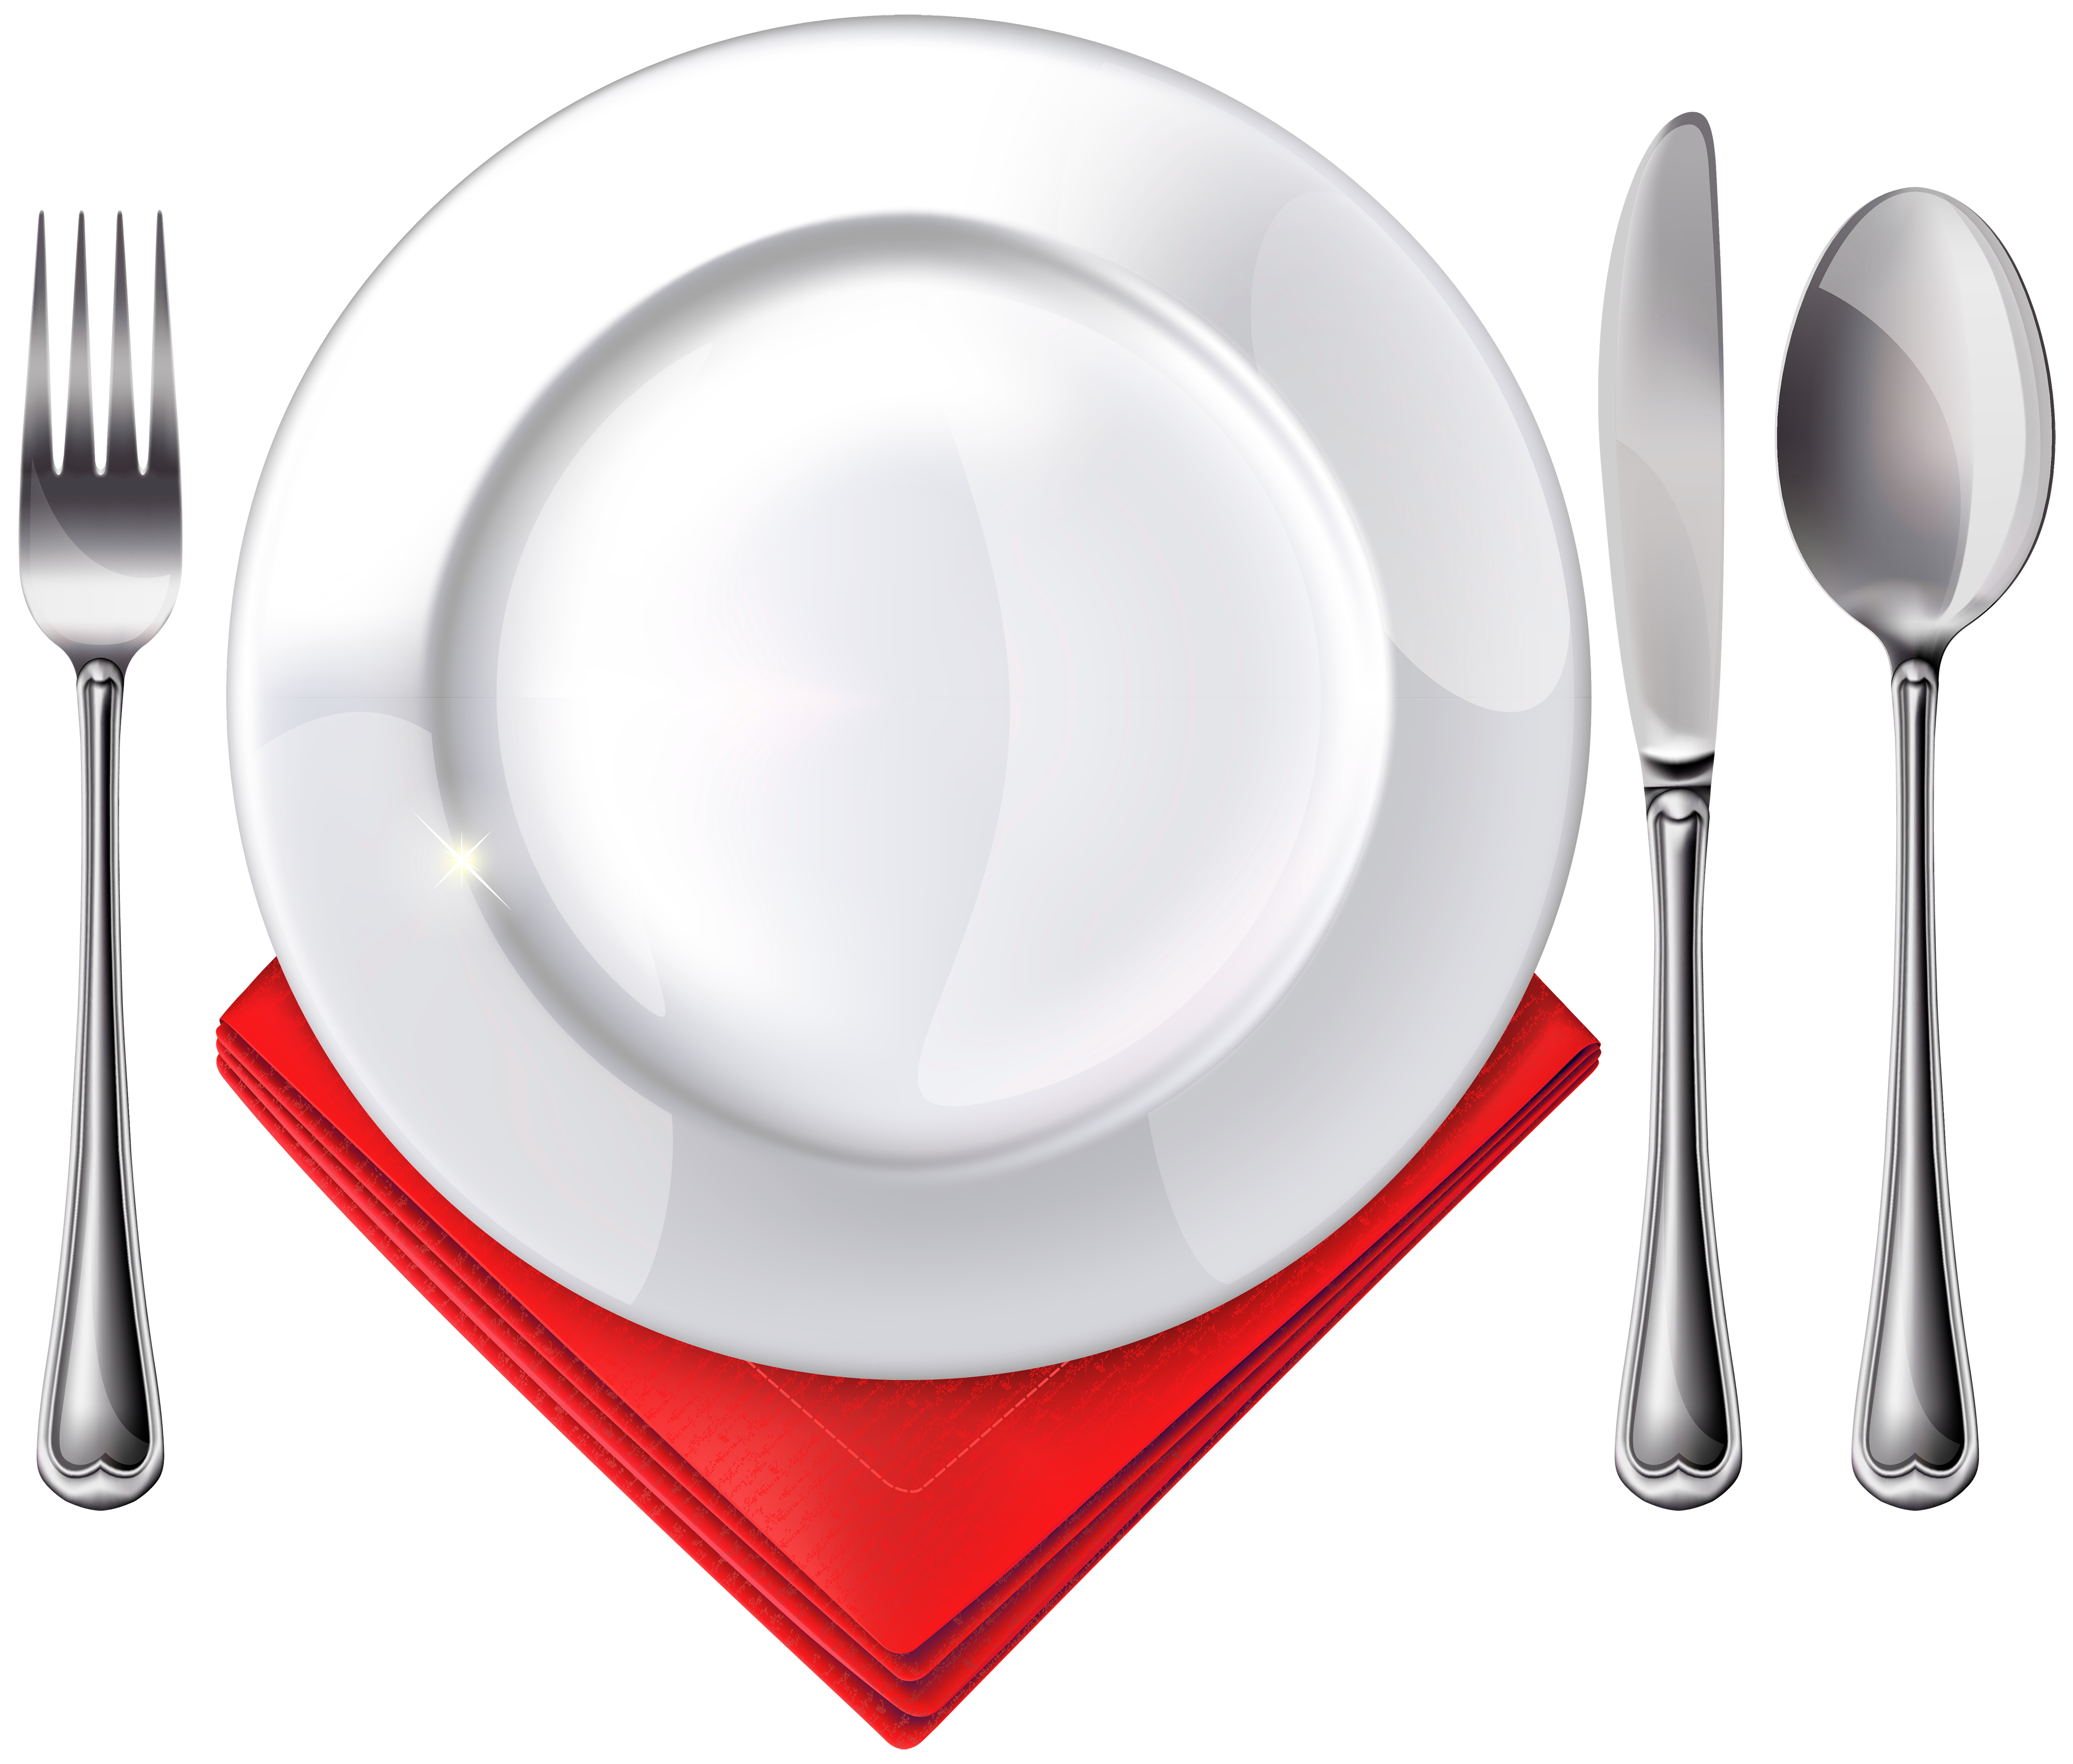 fork and spoon clip art